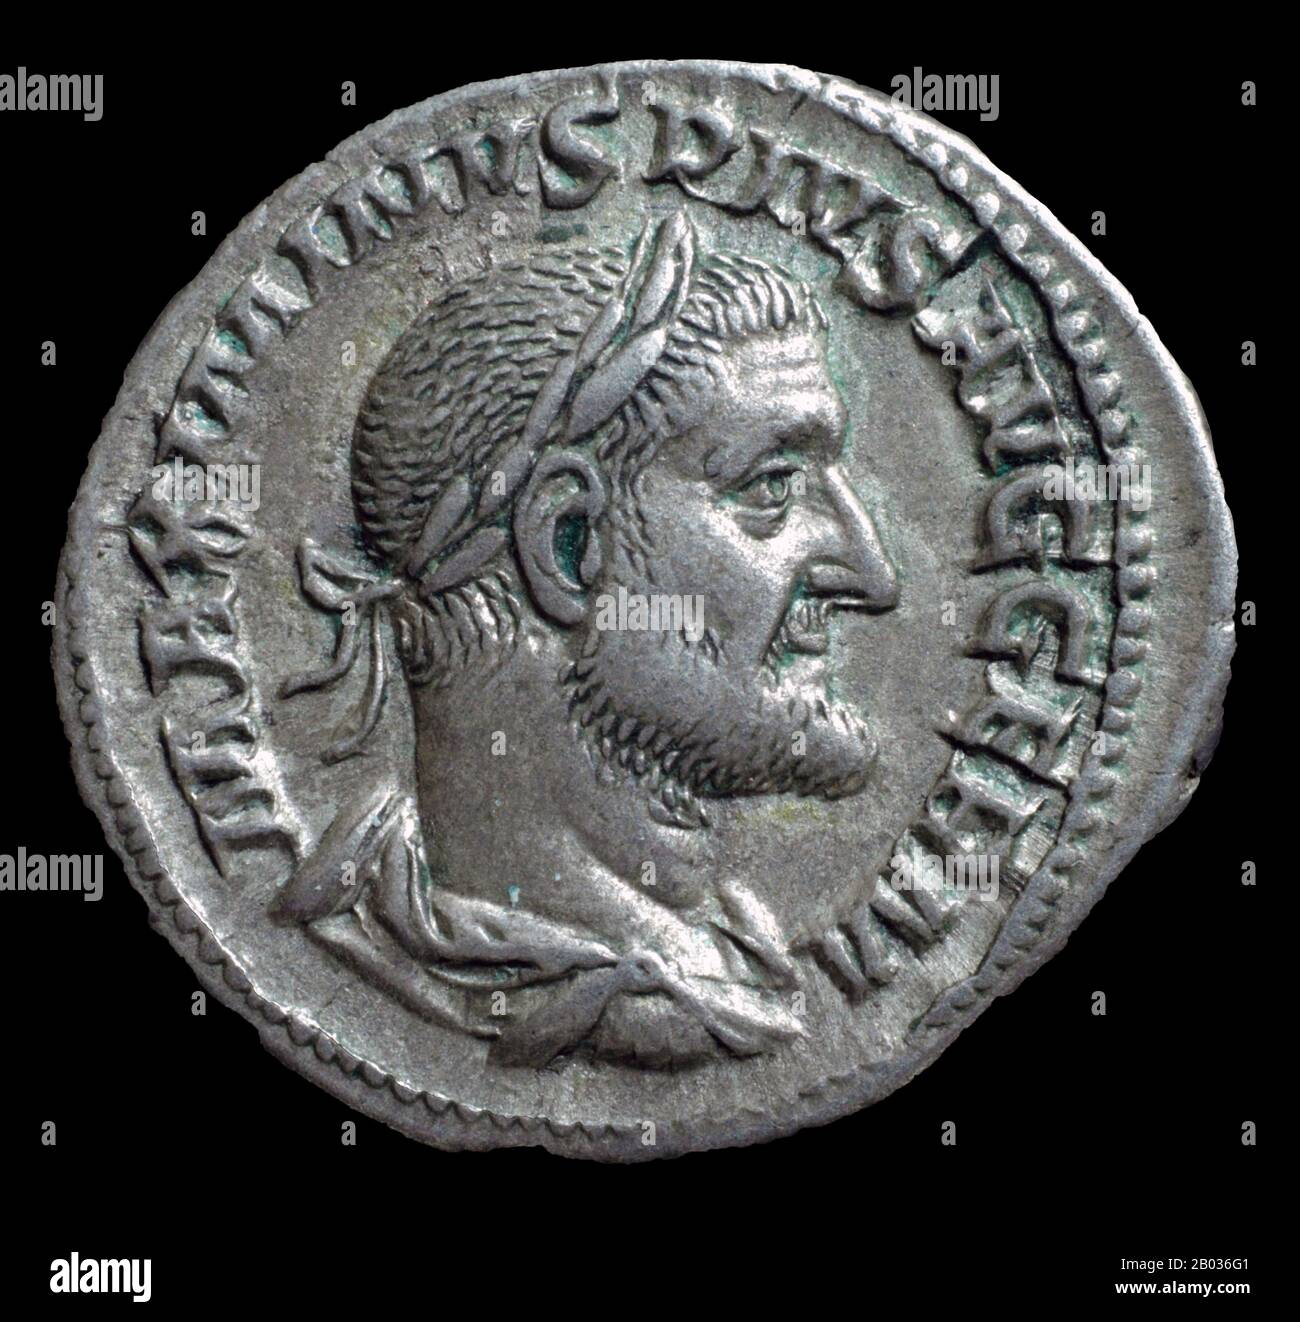 Of Thraco-Roman origin, Maximinus Thrax (173-238 CE) was a child of low birth, and was seen by the Senate as a barbarian and not a true Roman, despite Caracalla's Antonine Constitution granting citizenship to all freeborn citizens of the Empire. A career soldier, Maximinus rose through the ranks until he commanded a legion himself. He was one of the soldiers who were angered by Emperor Severus Alexander's payments to the Germanic tribes for peace, and plotted with them to assasinate the emperor in 235 CE.  The Praetorian Guard declared Maximinus emperor after the act, a choice that was only gr Stock Photo